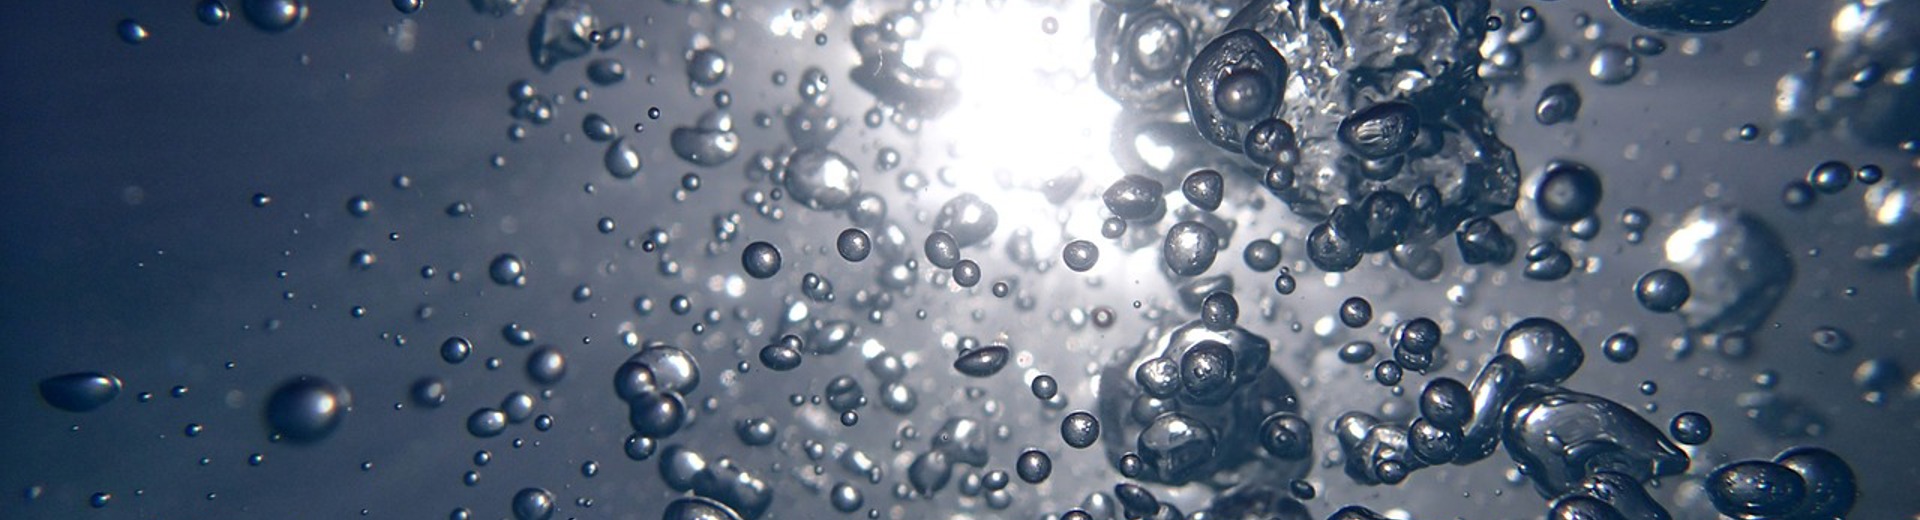 Bubbles in water with sunlight